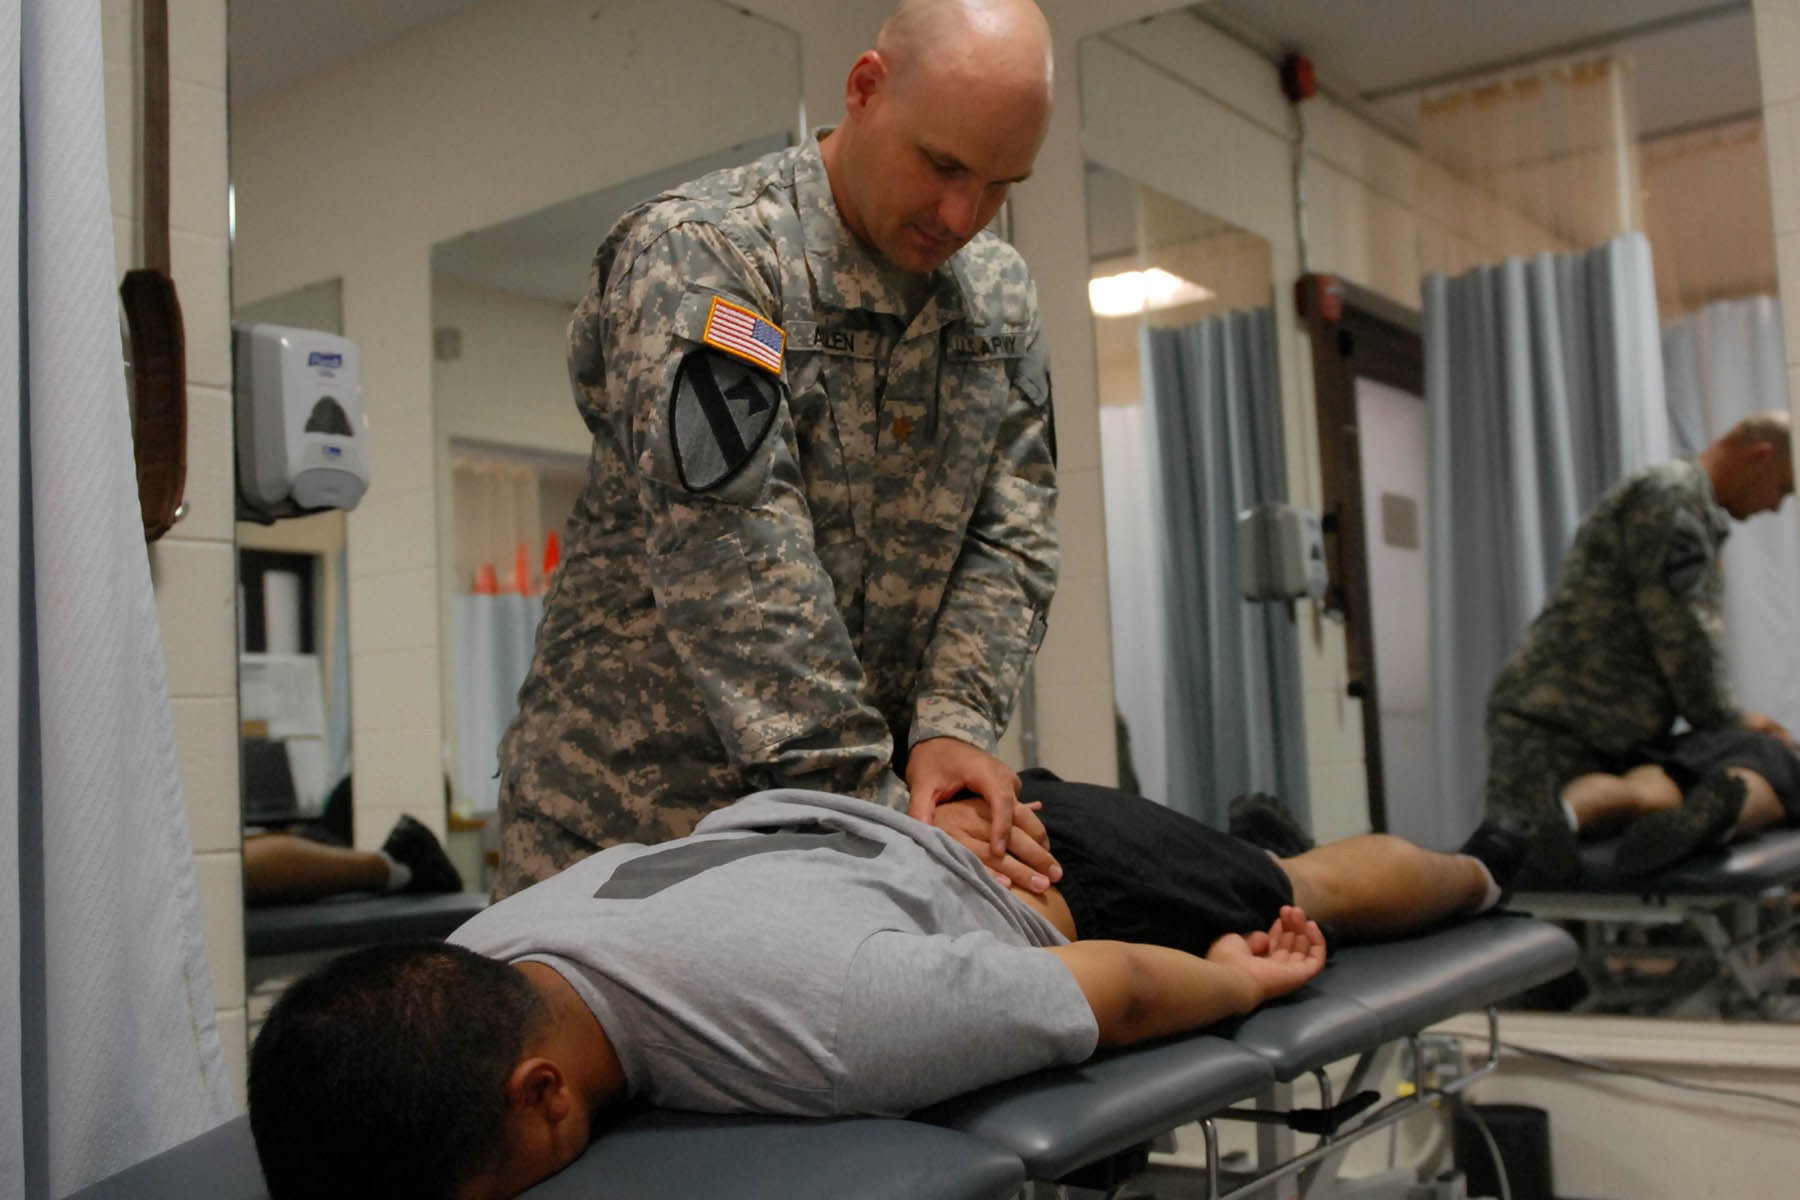 Physical Therapy a noninvasive recovery Article The United States